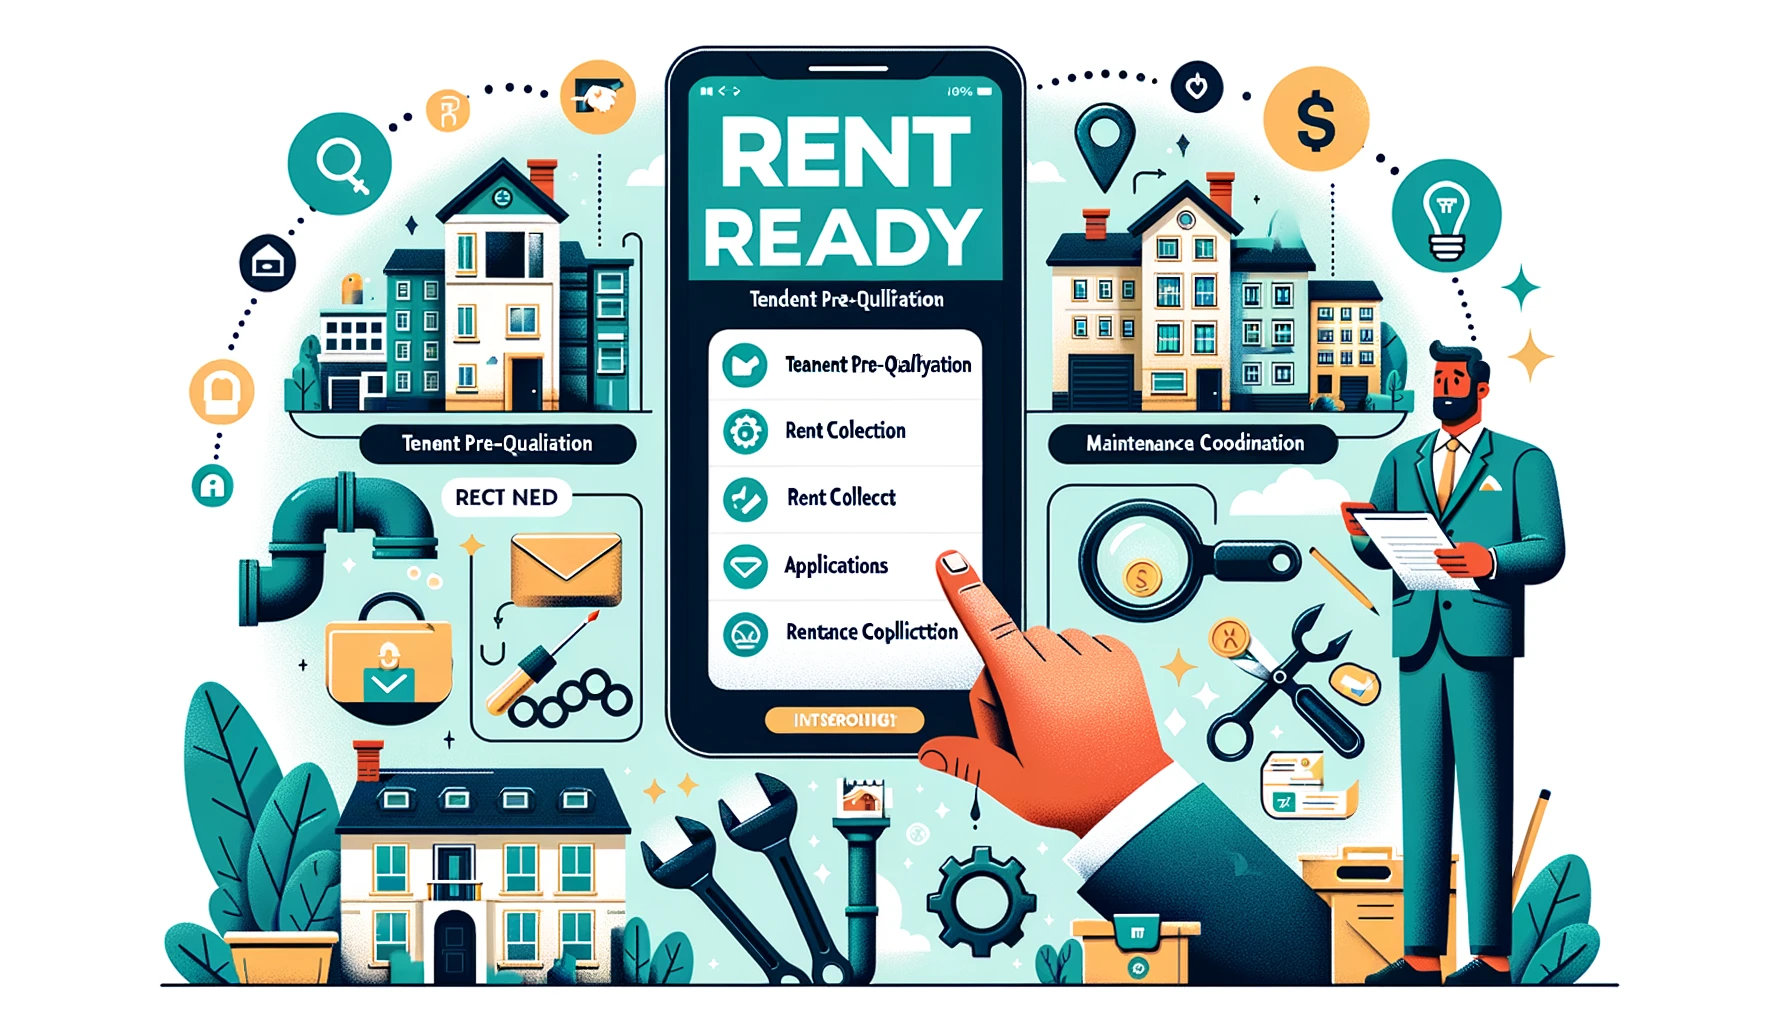 Illustration of the Rent Ready platform dashboard with features like tenant pre-qualification, maintenance coordination, and rent collection. Landlord reviewing applications and coordinating tasks, with an interview scene featuring CEO Ryan and platform logos in the background.